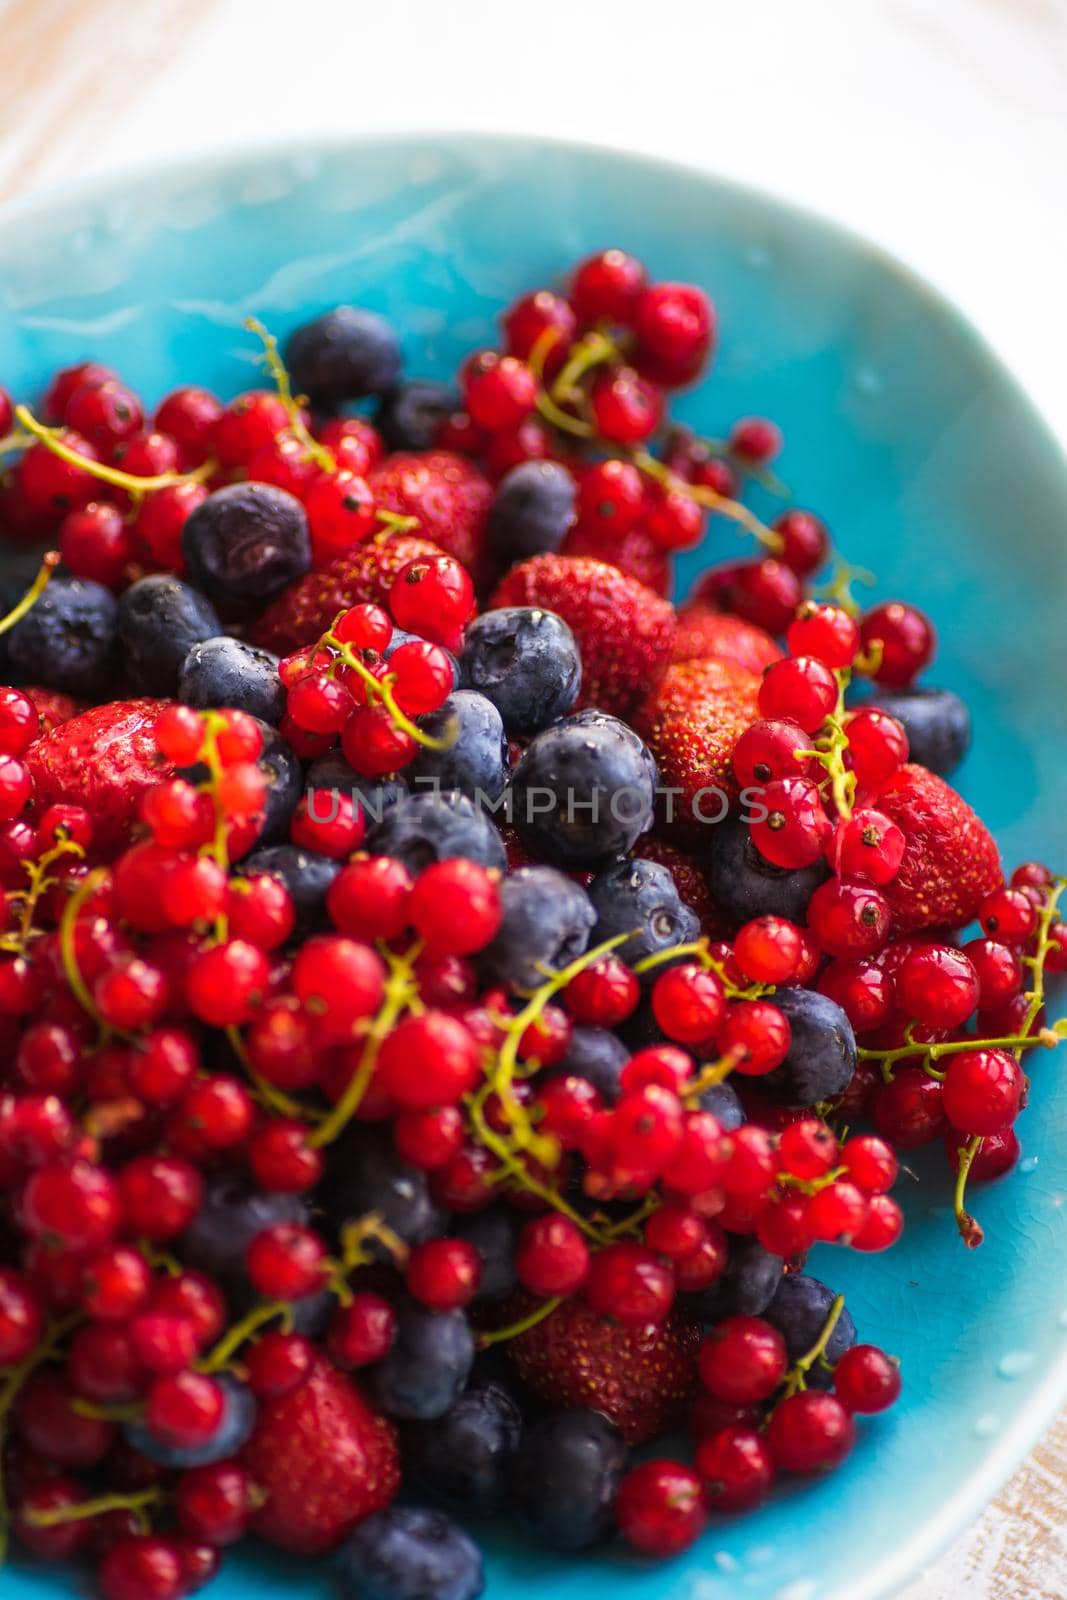 Plate with fresh organic berries - strawberry, blueberry (bilberry) and redcurrant on rustic wooden table with copyspace